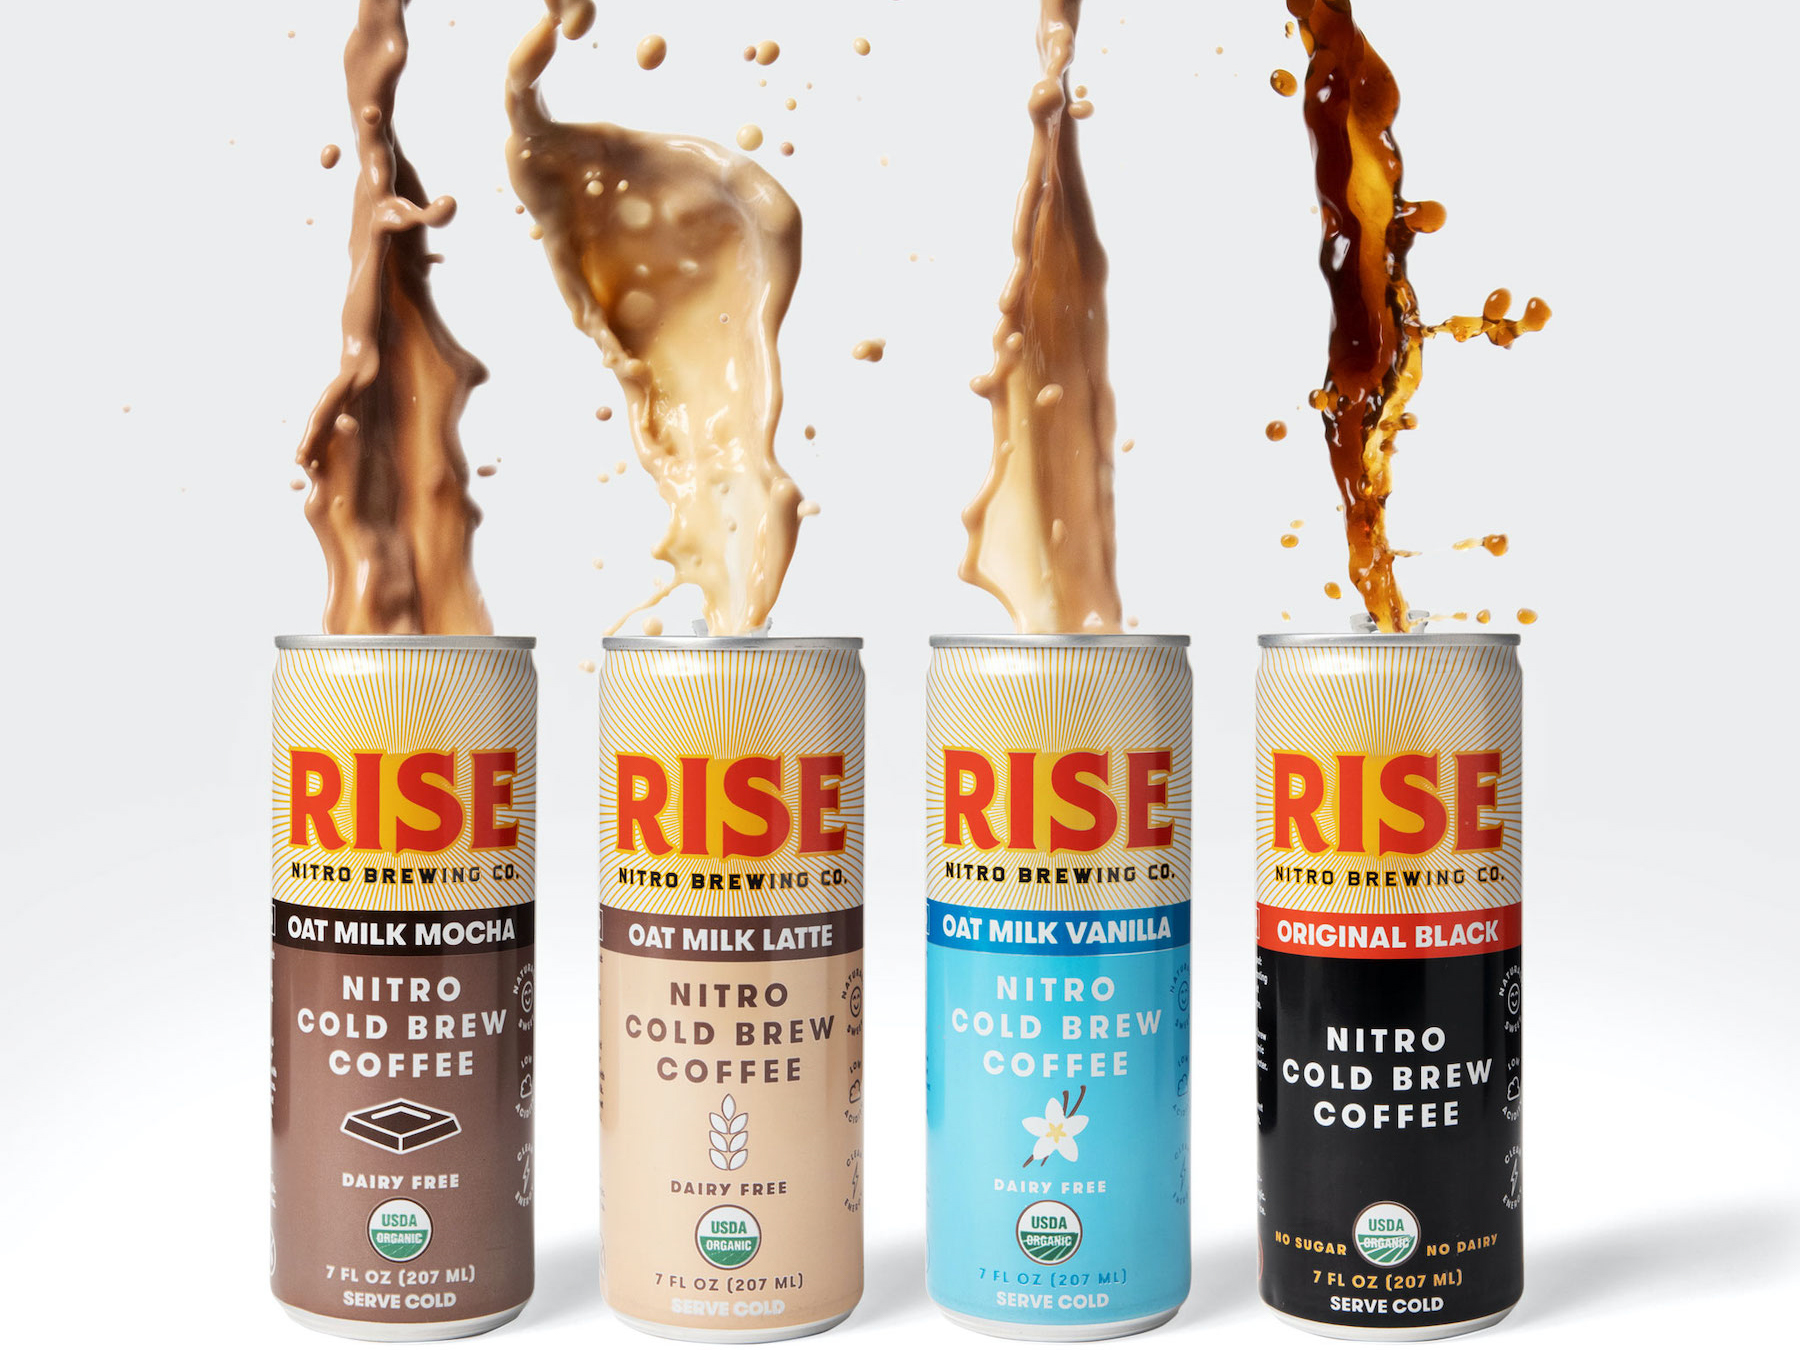 RISE Brewing Coʼs Nitro Cold Brew Coffee Is On Sale NOW At Publix – Stock Up For Summer! on I Heart Publix